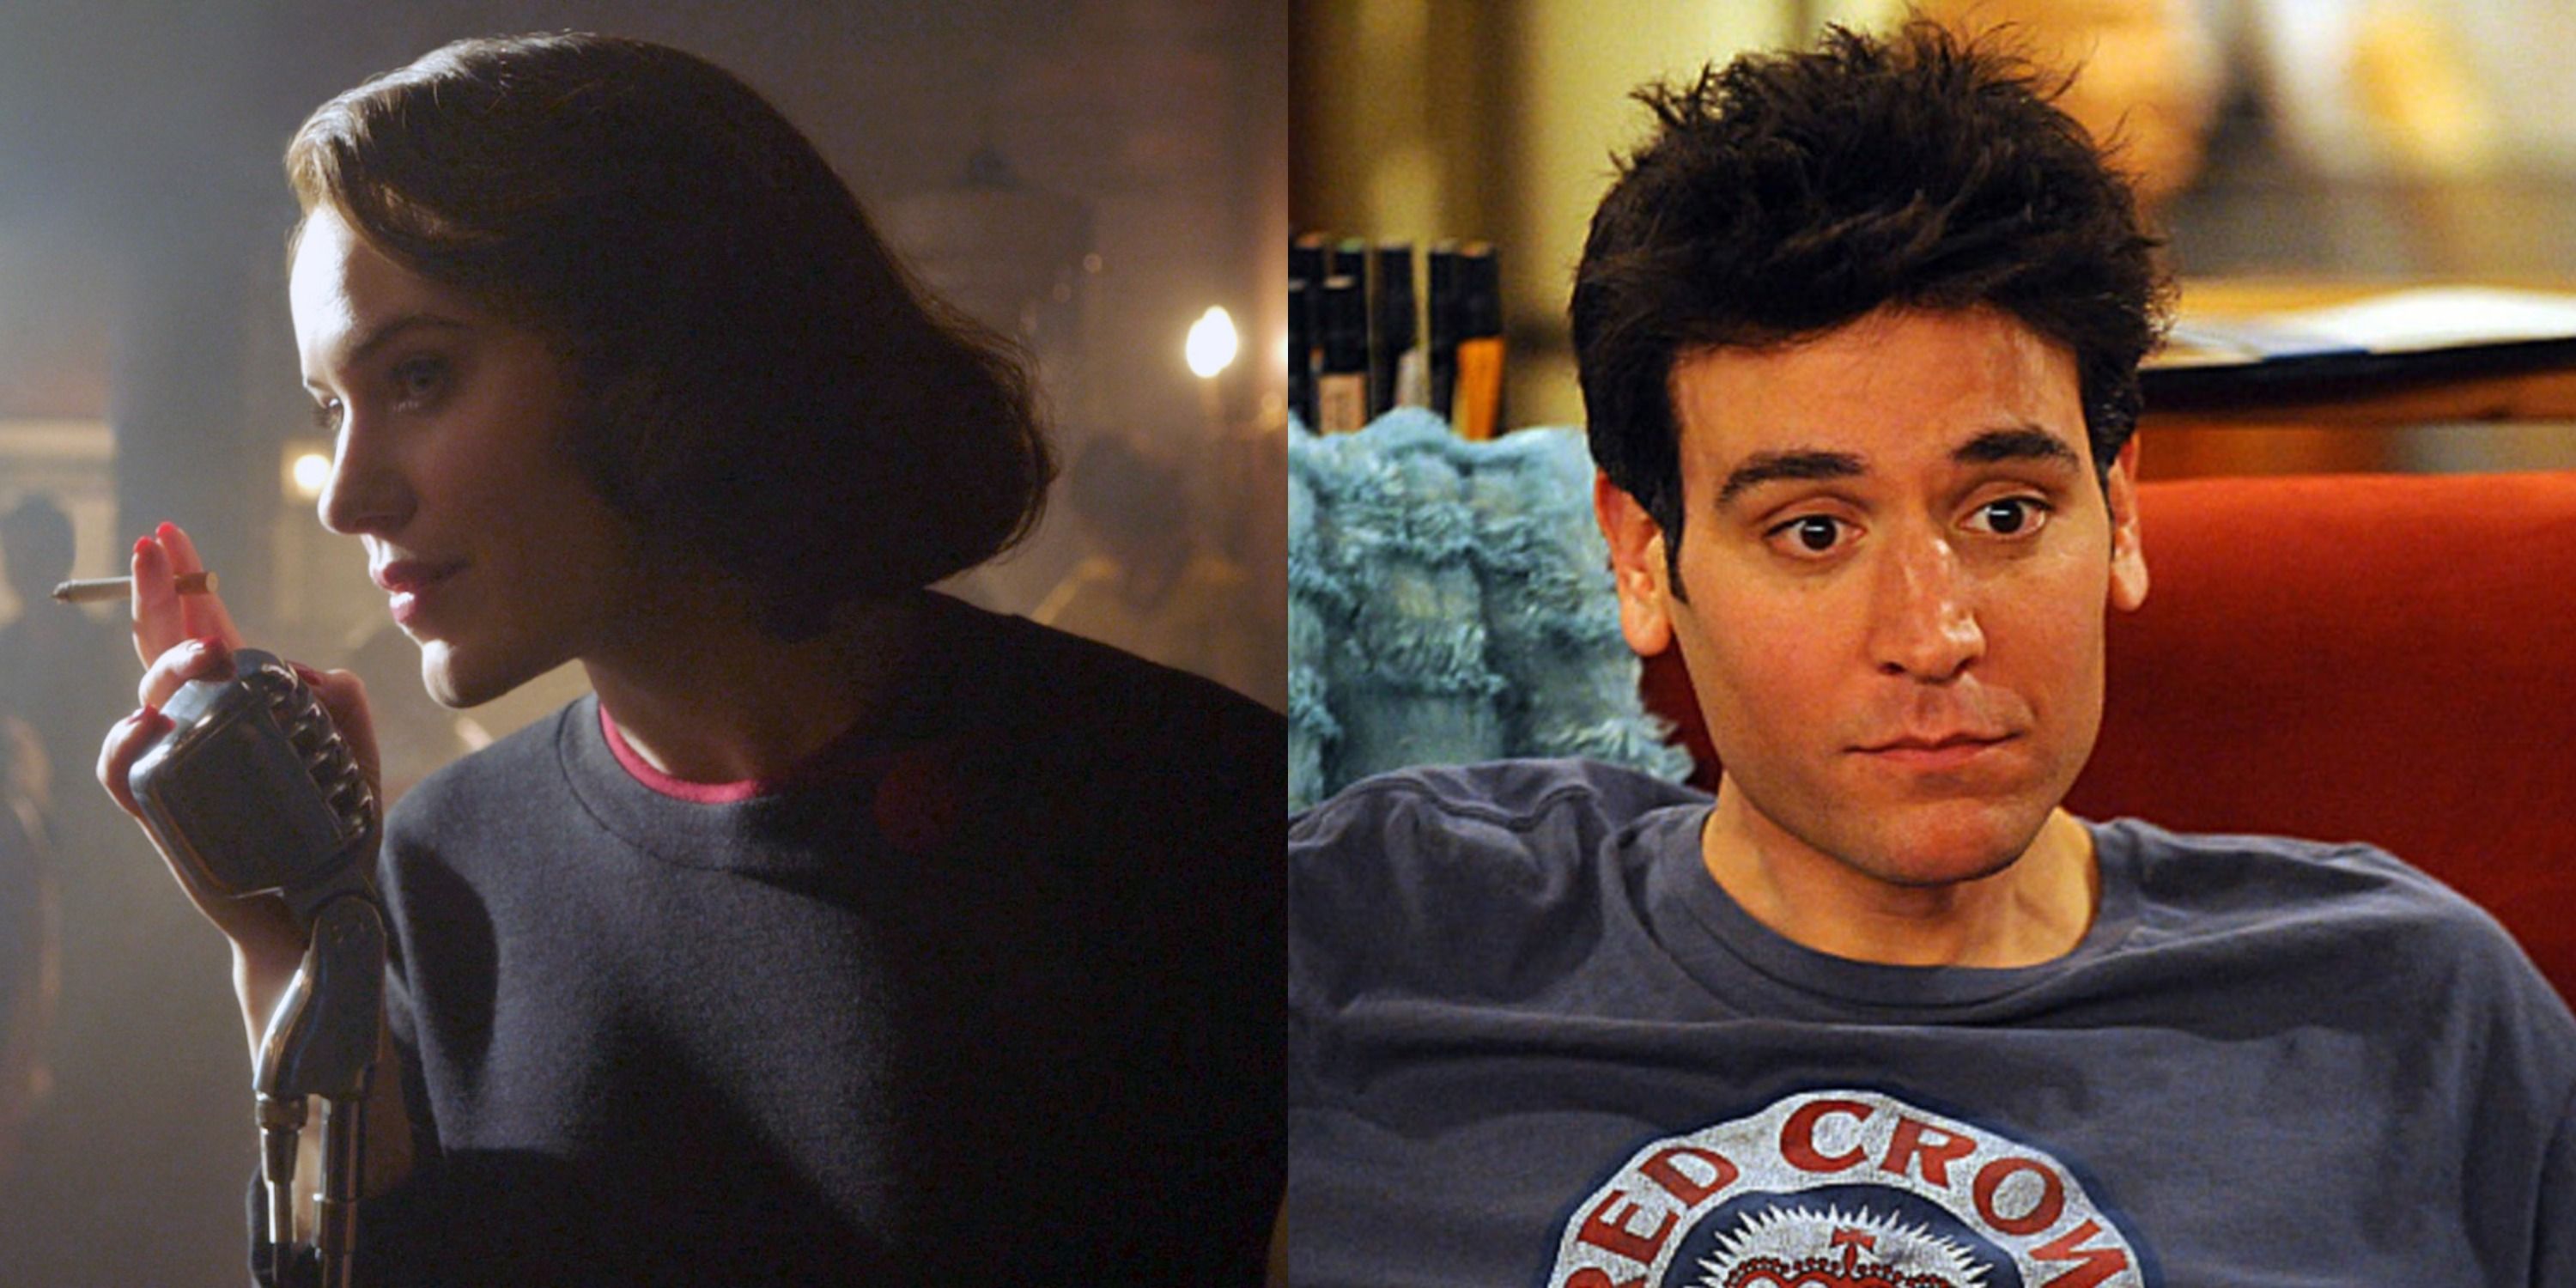 Featured image Midge in the Marvelous Mrs Maisel and Ted Mosby in How I Met Your Mother